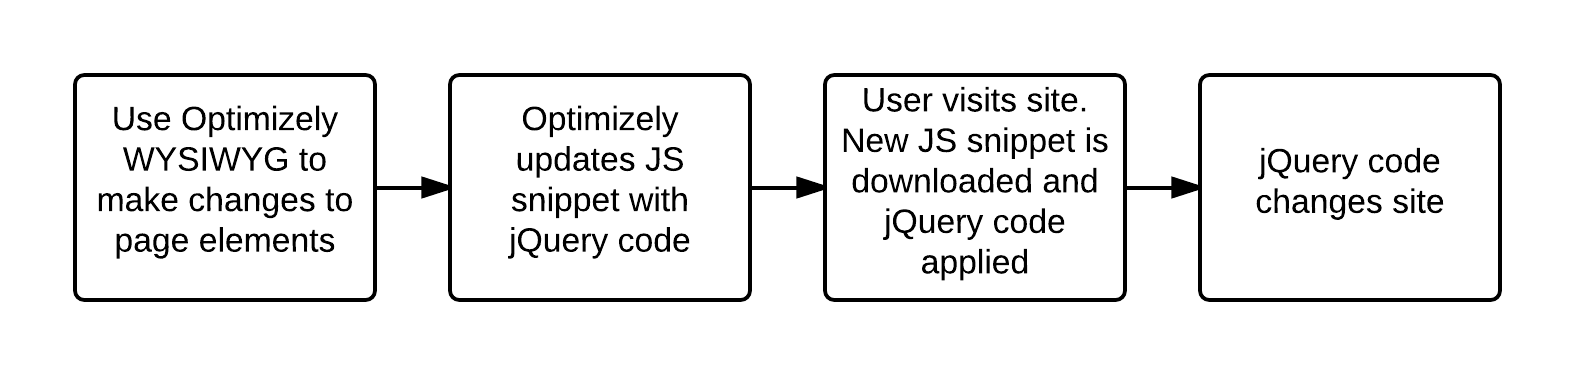 How Optimizley changes the page